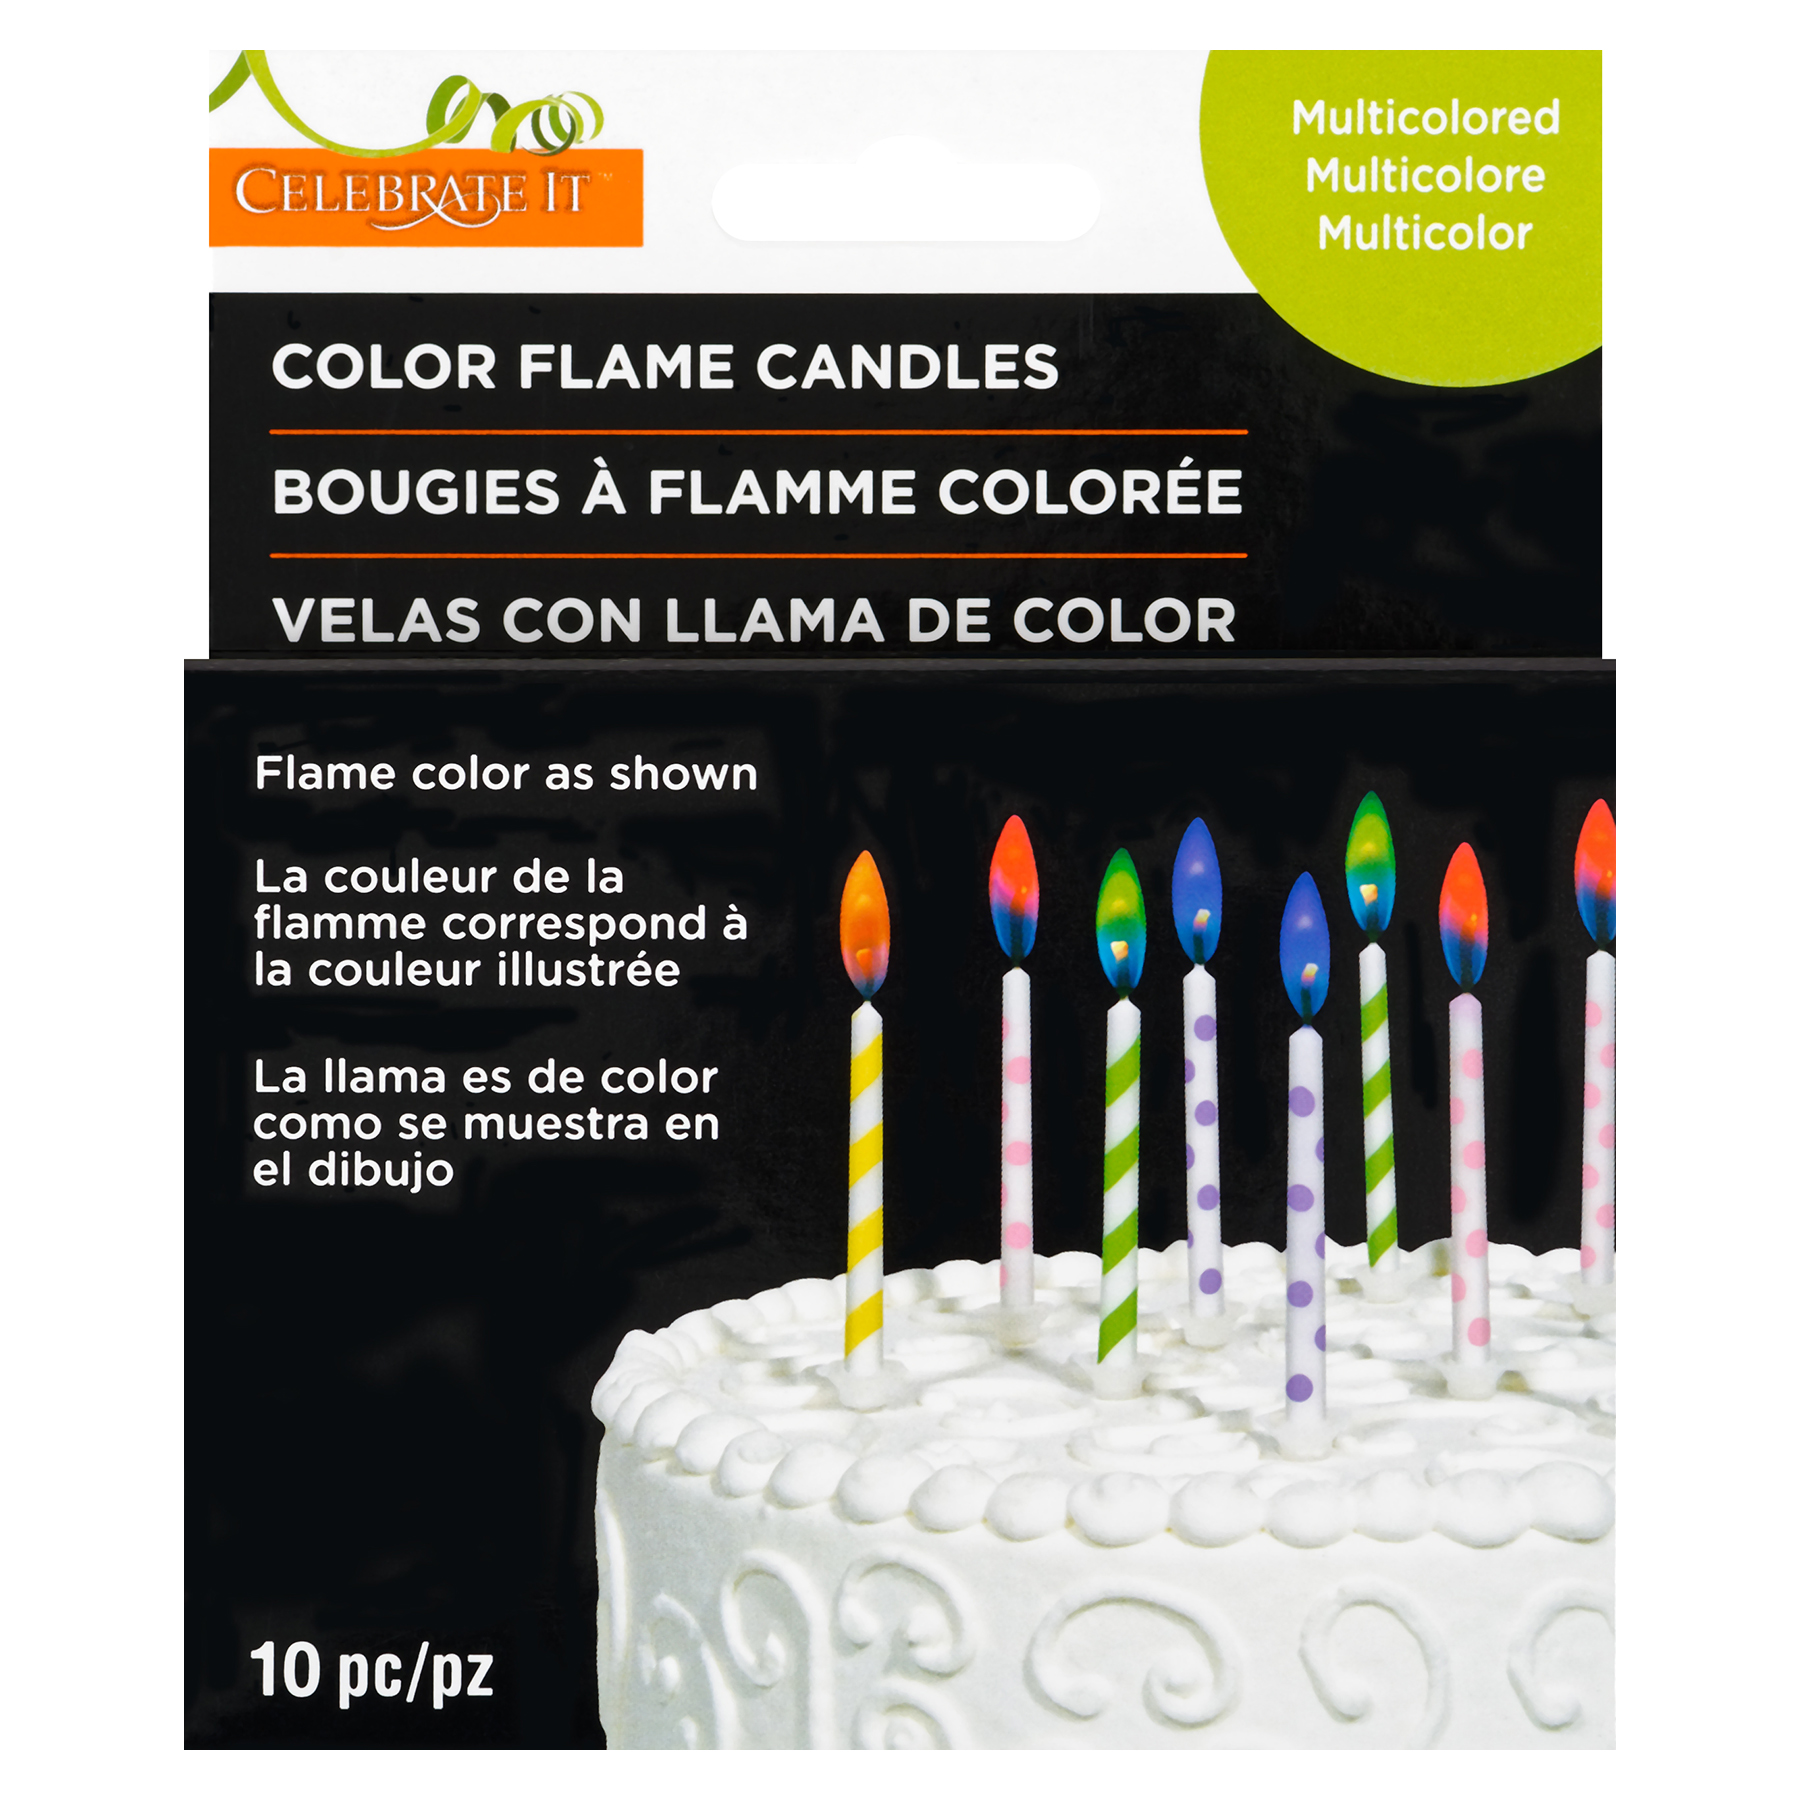 Image result for celebrate it color flame candles